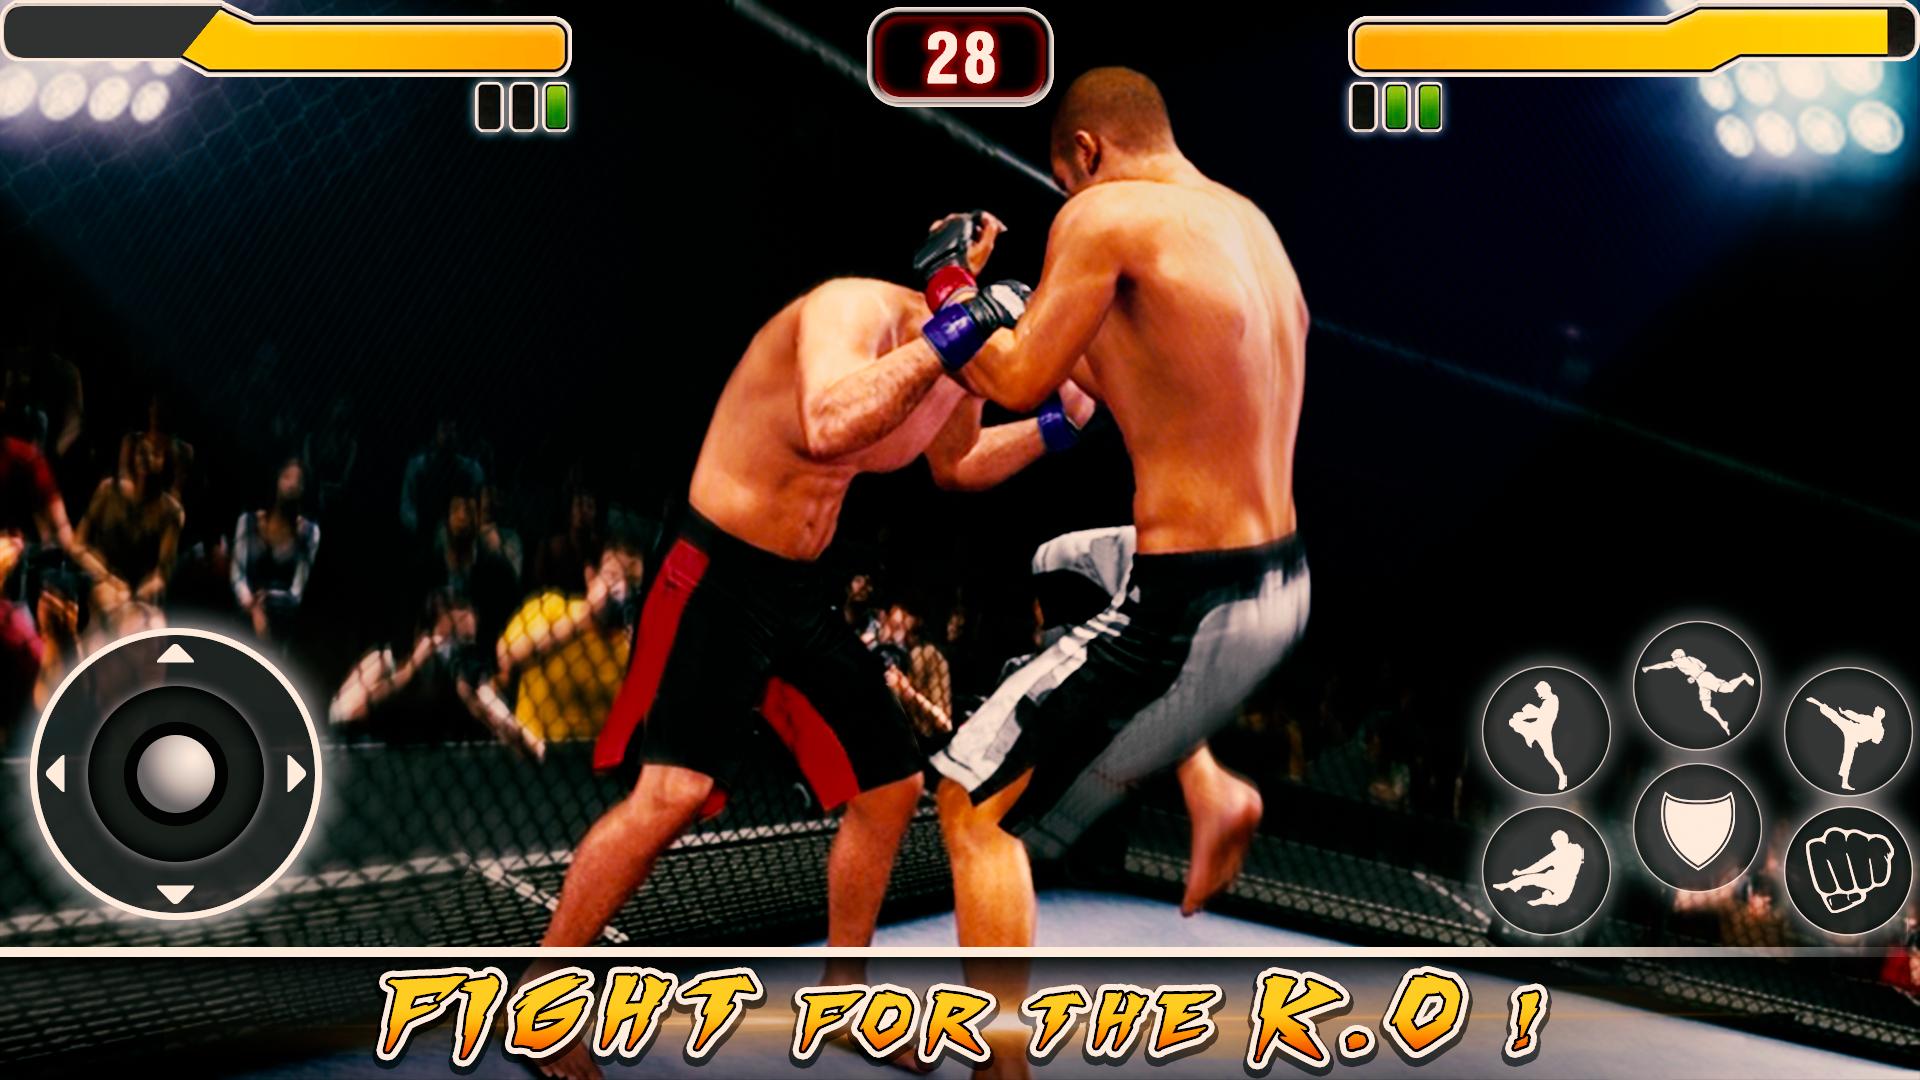 Boxing Champion: Real Boxing Fun 2020 for Android - APK Download